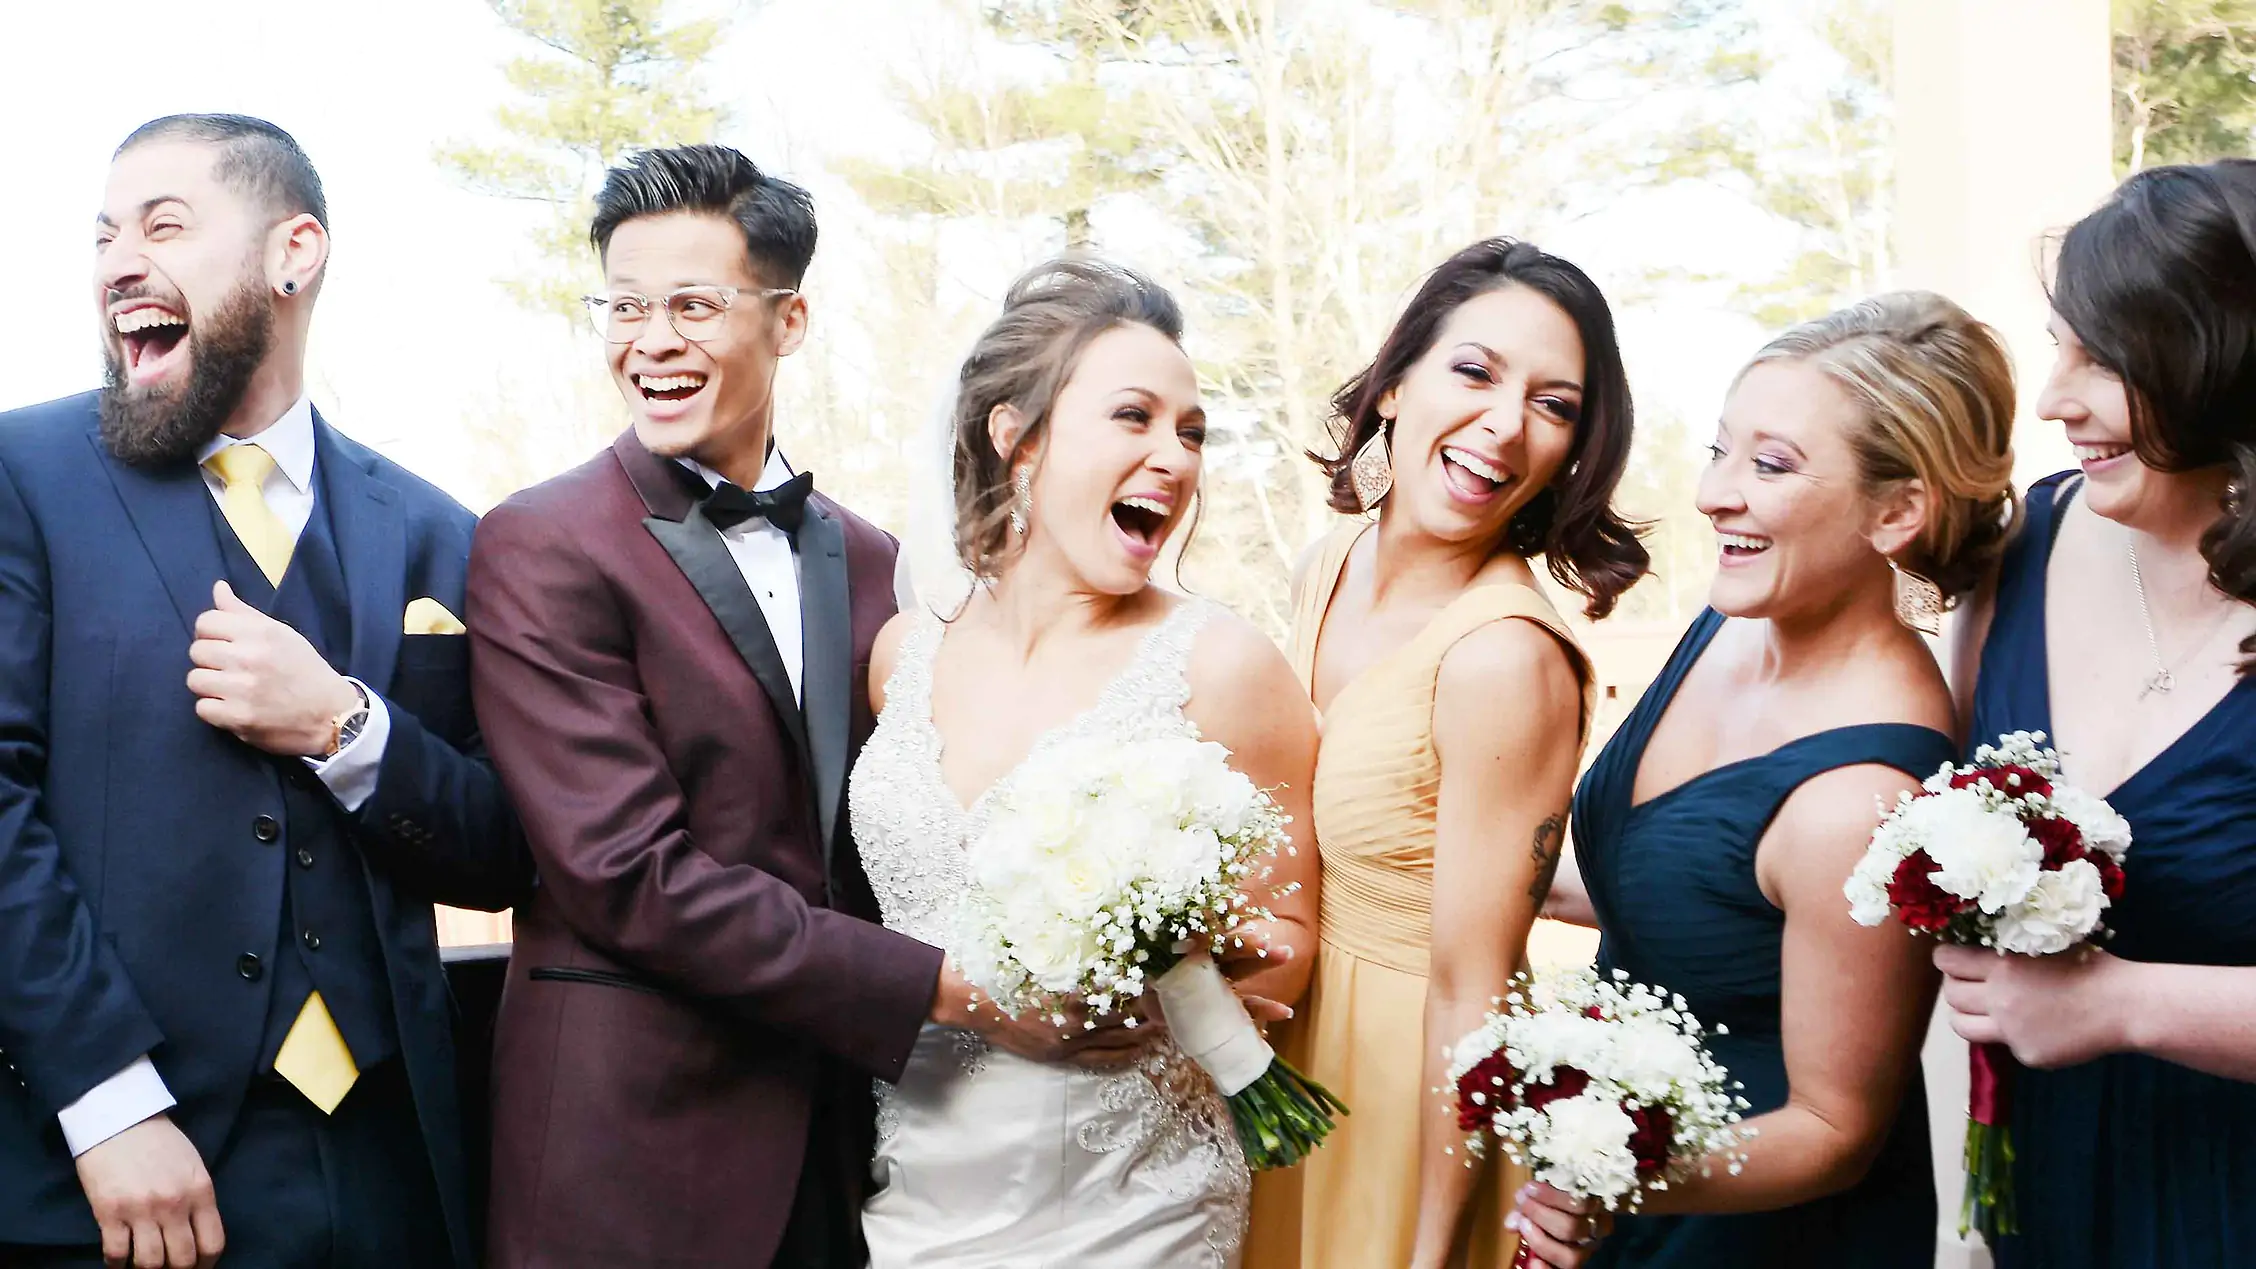 JULIA AND JESSE ARE ALL SMILES WITH THEIR BRIDAL PARTY